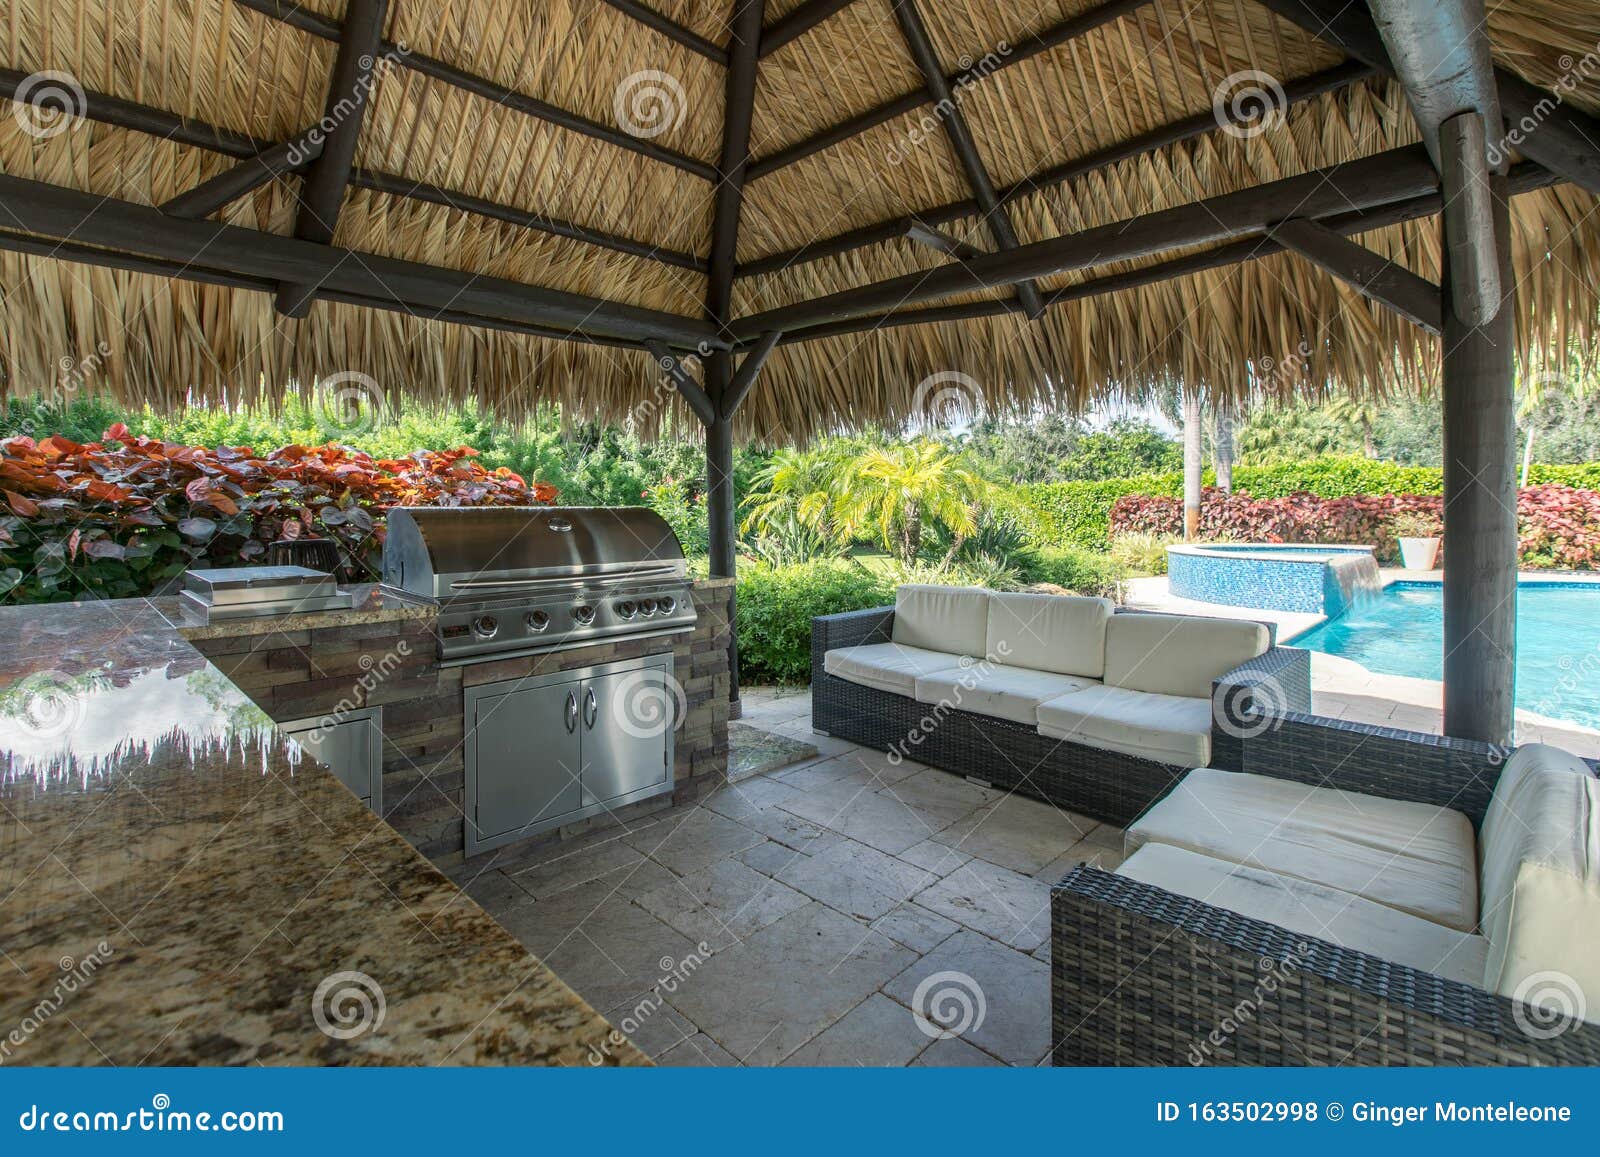 outdoor tiki hut with outdoor grill kitchen and pool